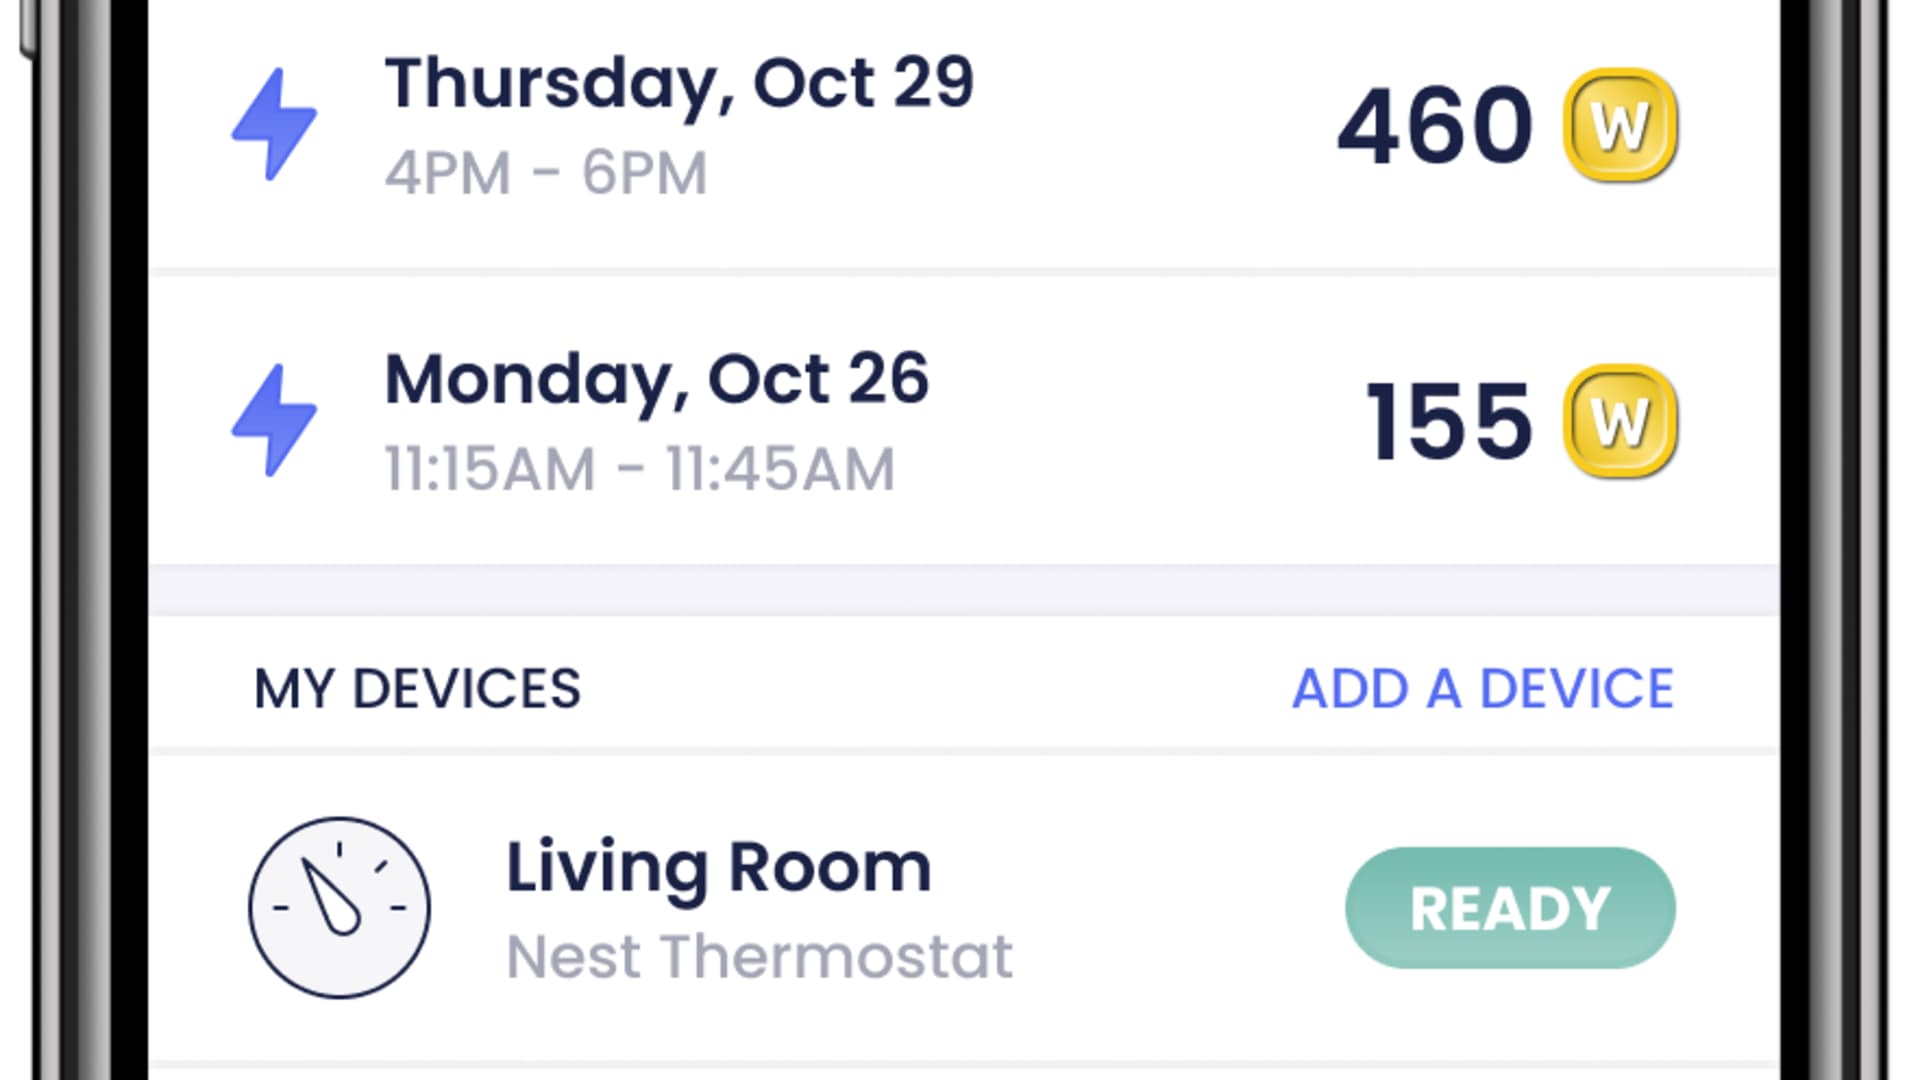 OhmConnect works with dozens of vendors of smart home technology, including the Google Nest, a partnership that pre-dates the recent investment.